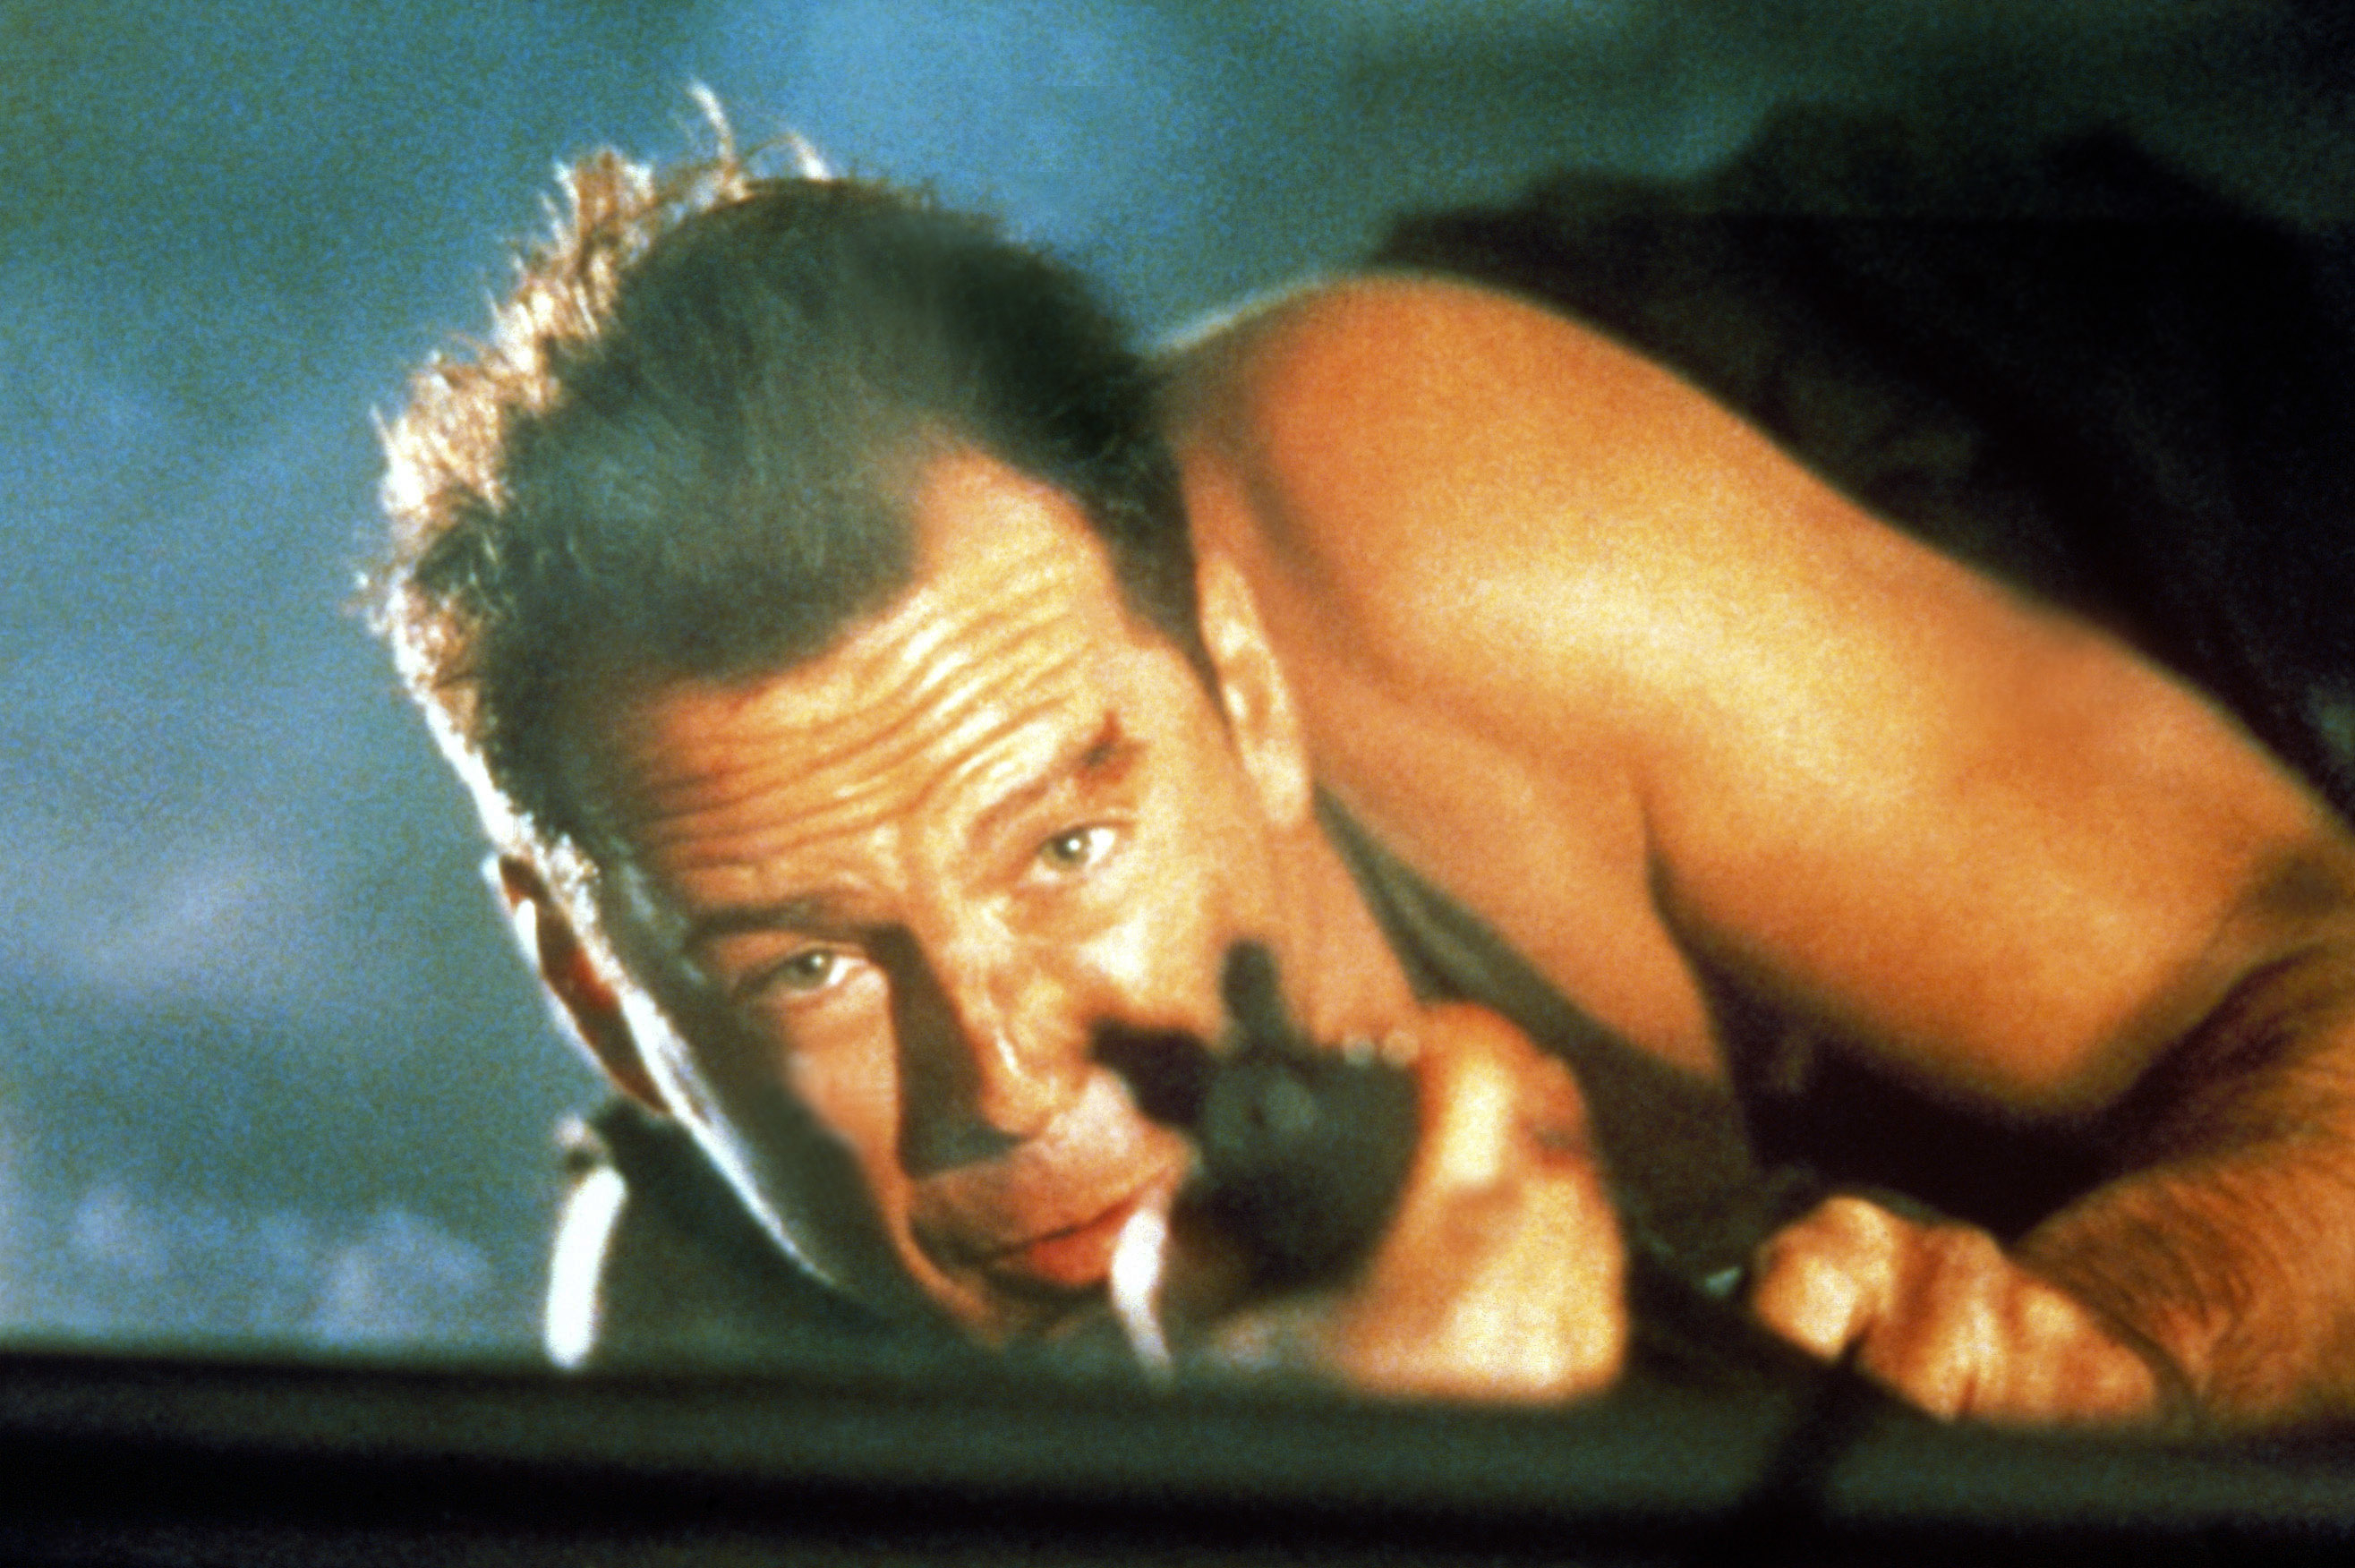 John McClane from Die Hard crawling with a gun, looking determined